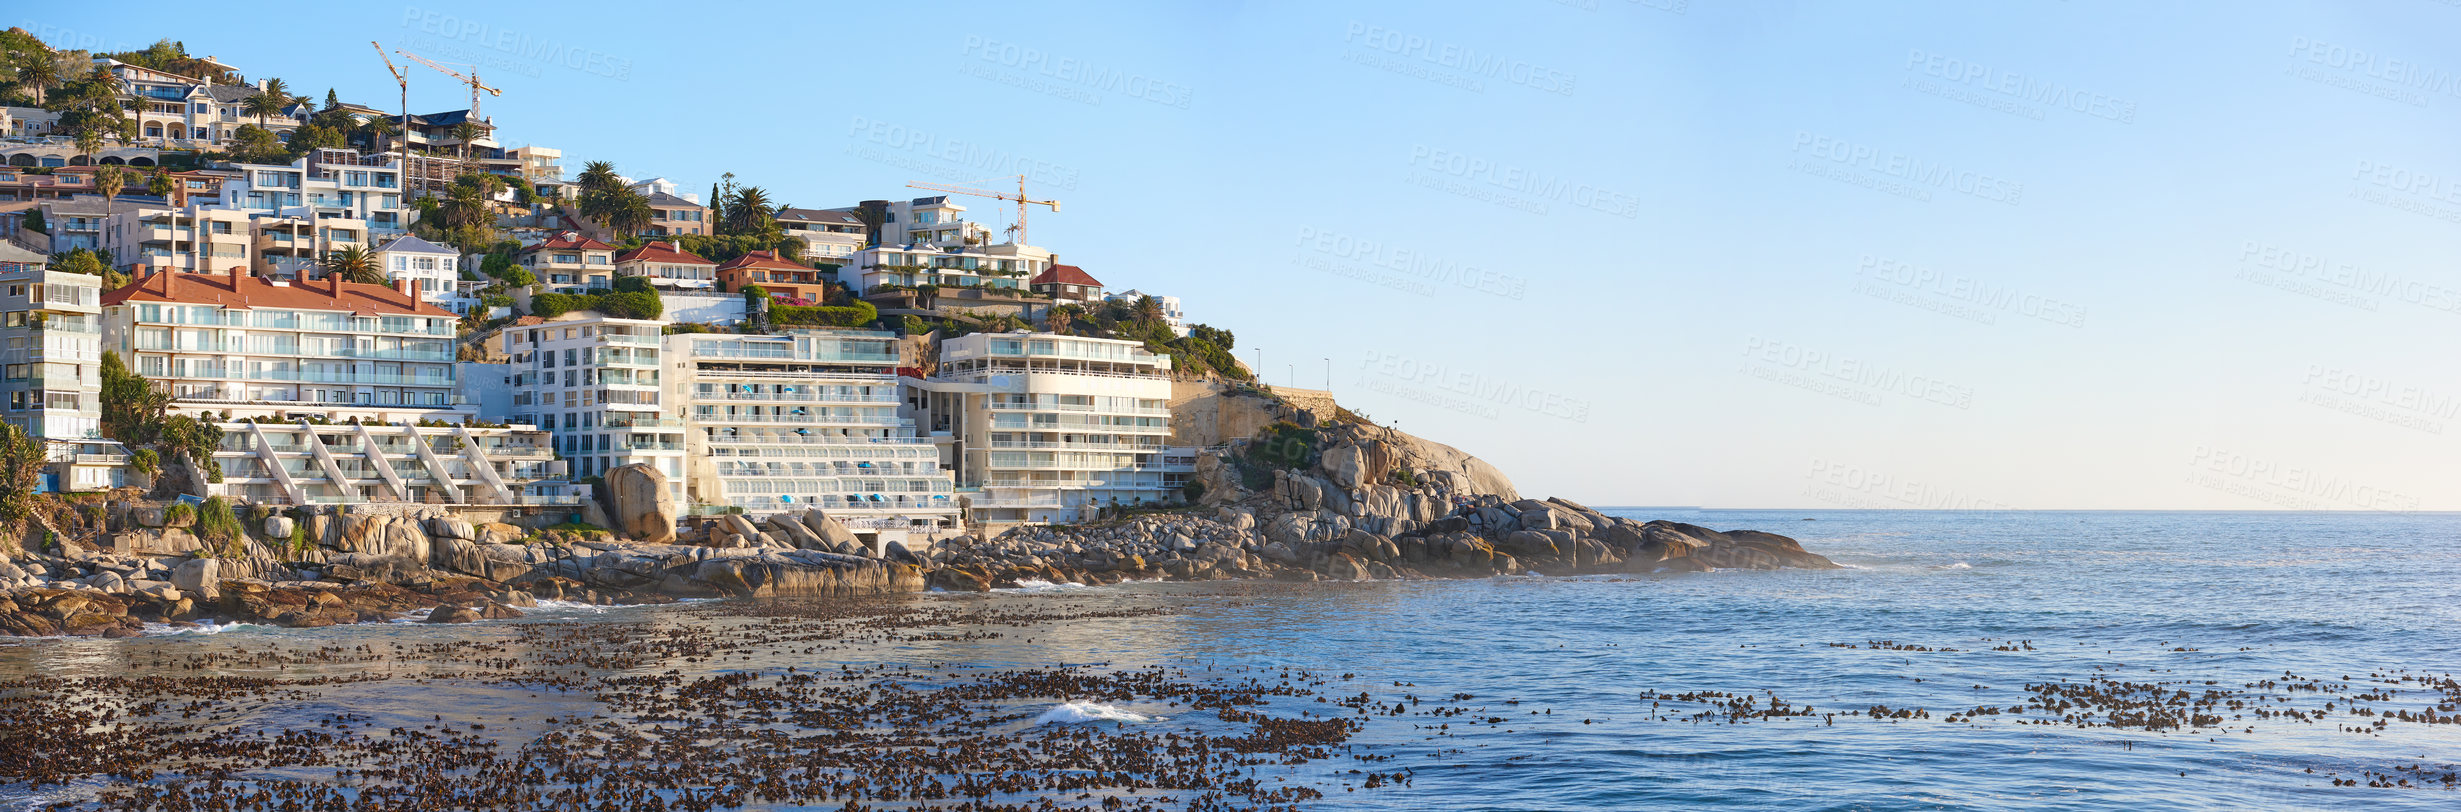 Buy stock photo Ocean view of Clifton beach in Cape Town, South Africa with blue sky and copy space. Infrastructure and houses built on a steep cliff. Calm beach and sea waves washing over rocky shoreline in summer